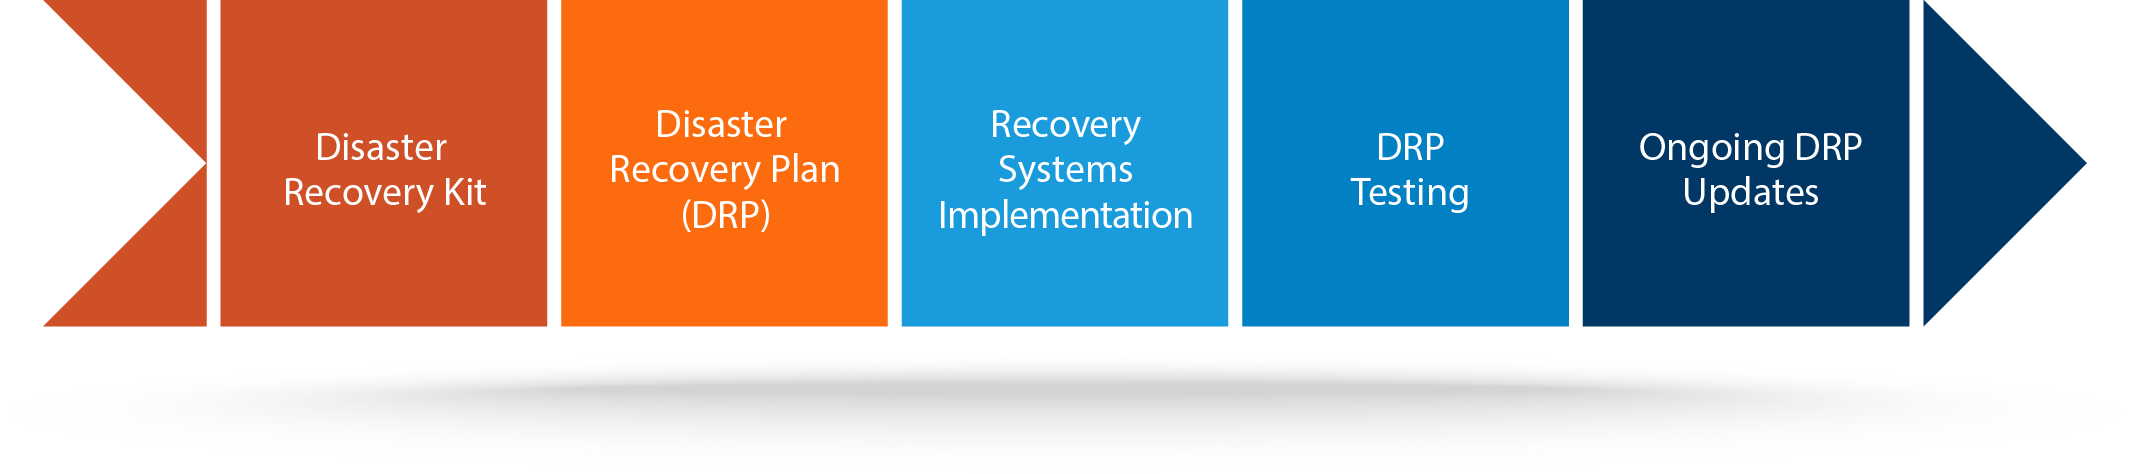 Disaster Recovery Kit -> Disaster Recovery Plan (DRP) -> Recovery System Implementation -> DRP Testing -> Ongoing DRP Updates